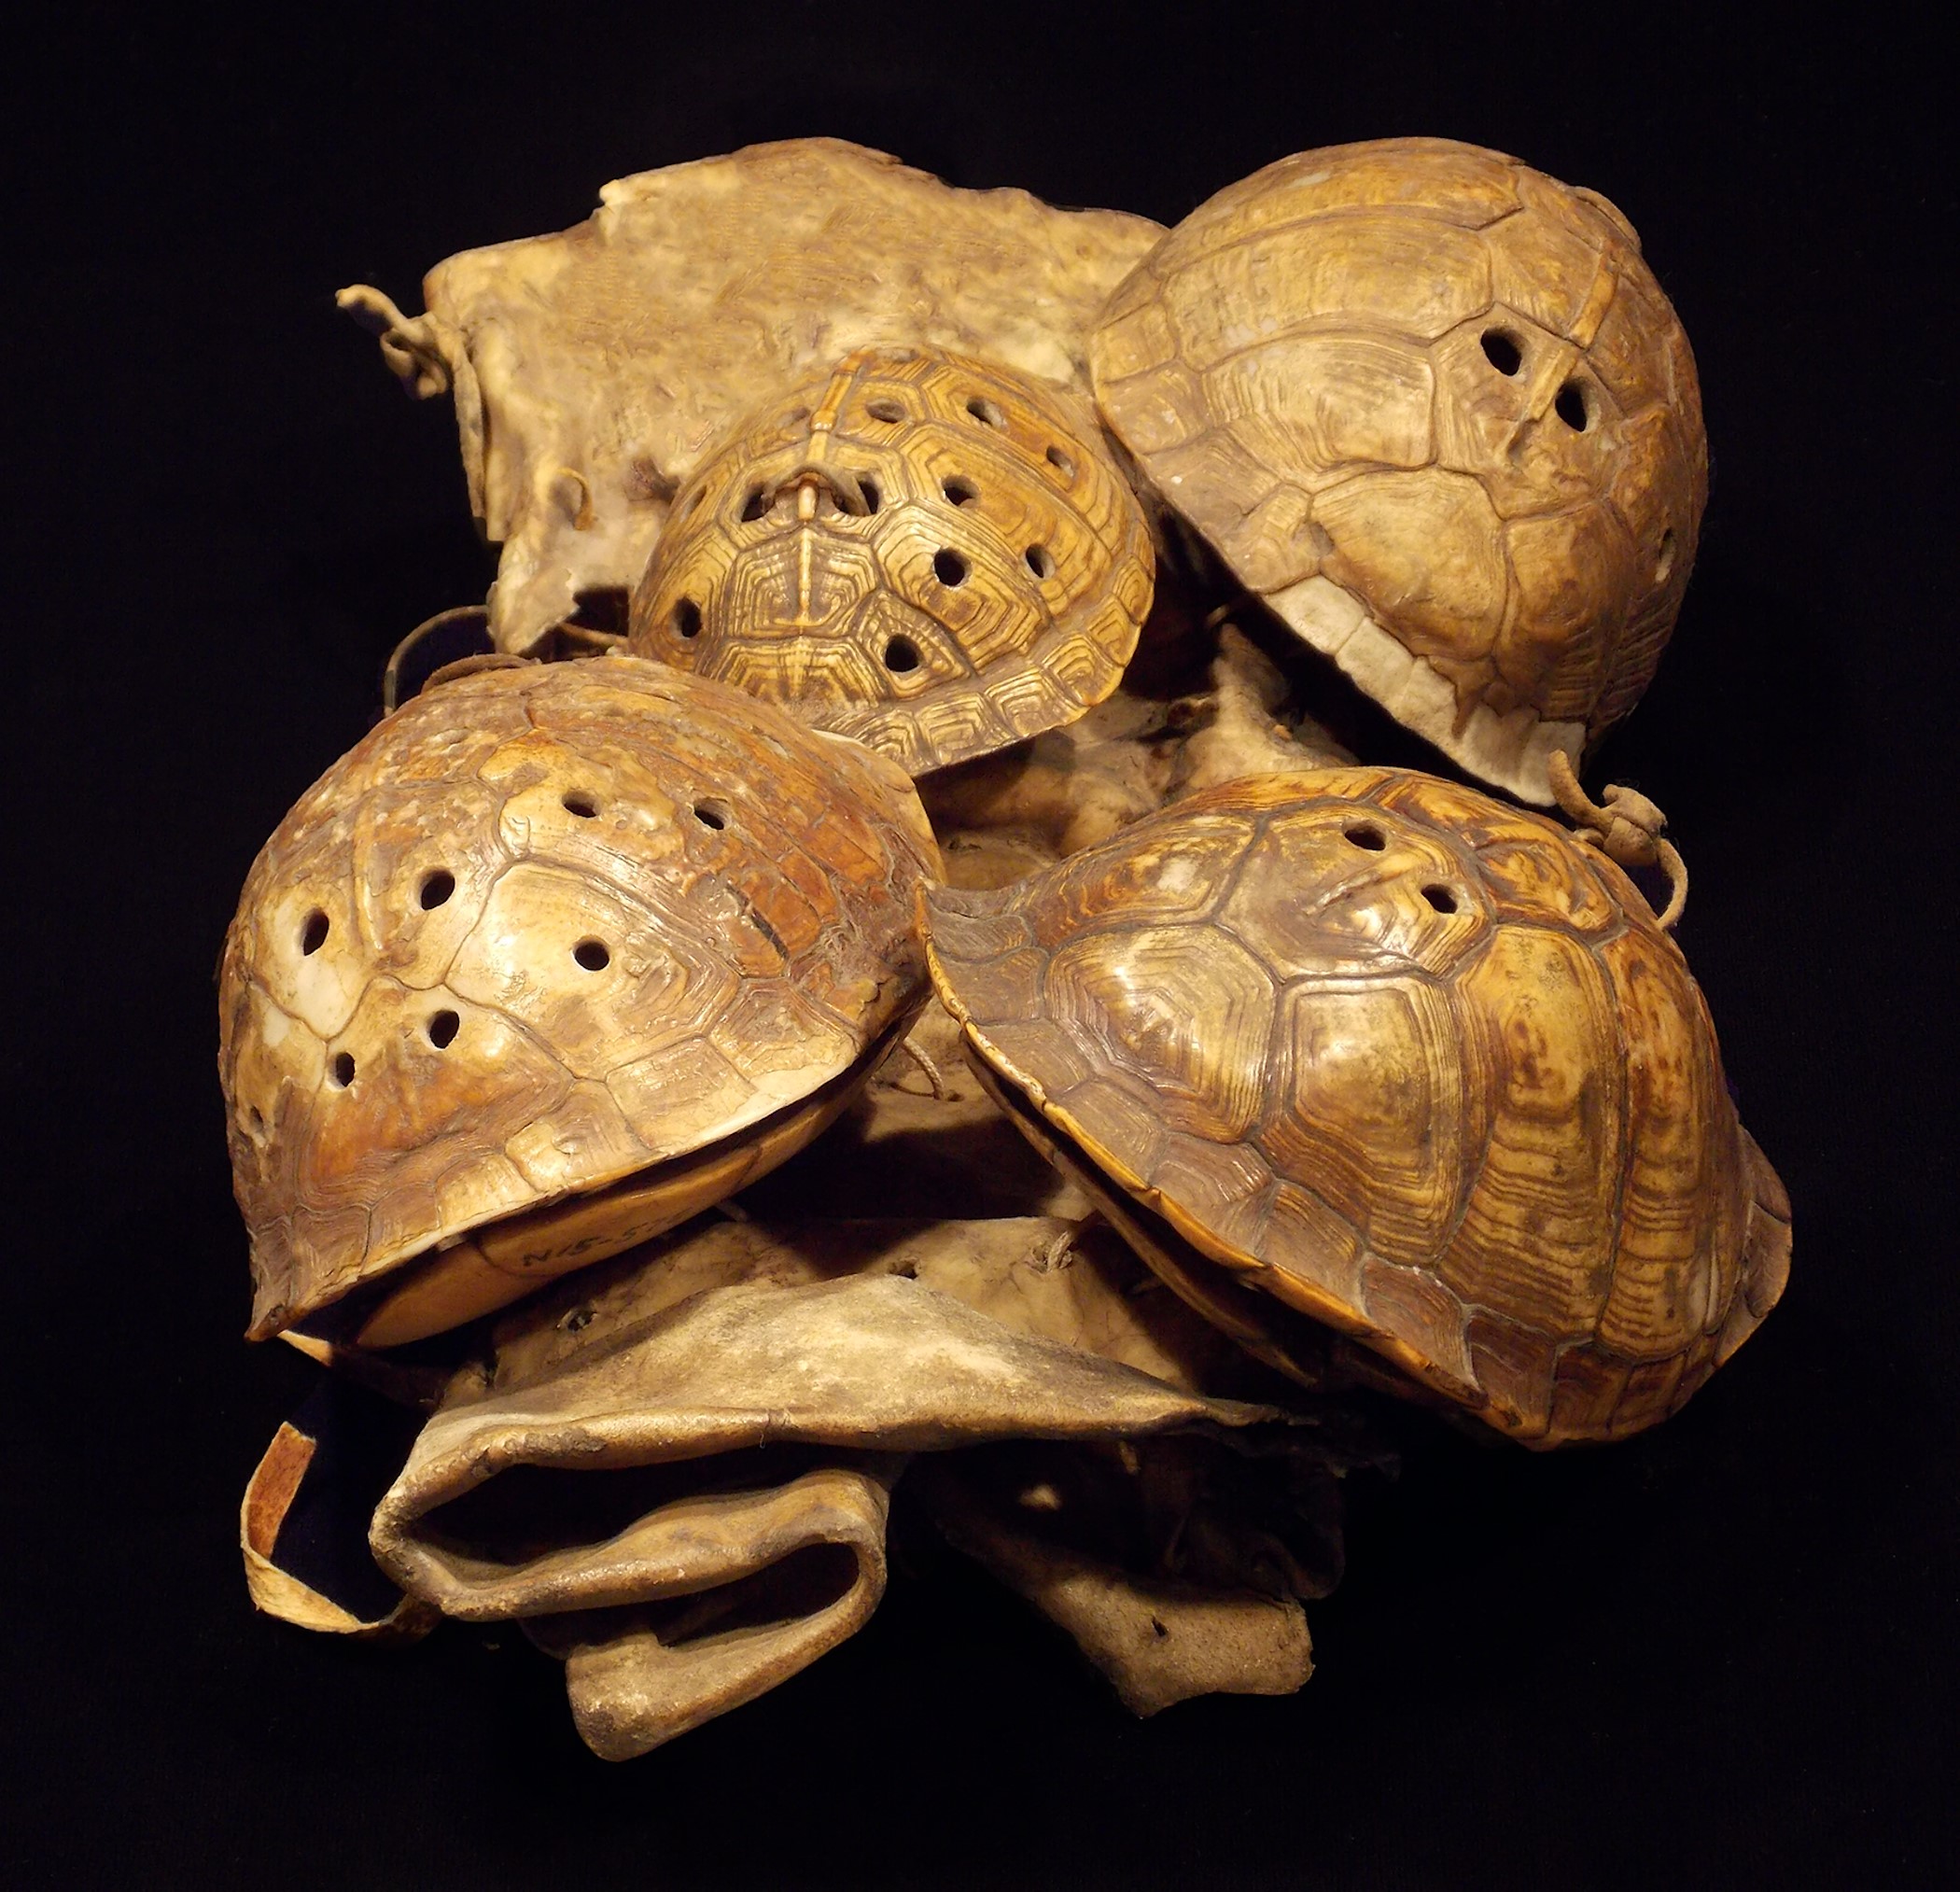 Keeping the beat: Turtle shells served as symbolic musical